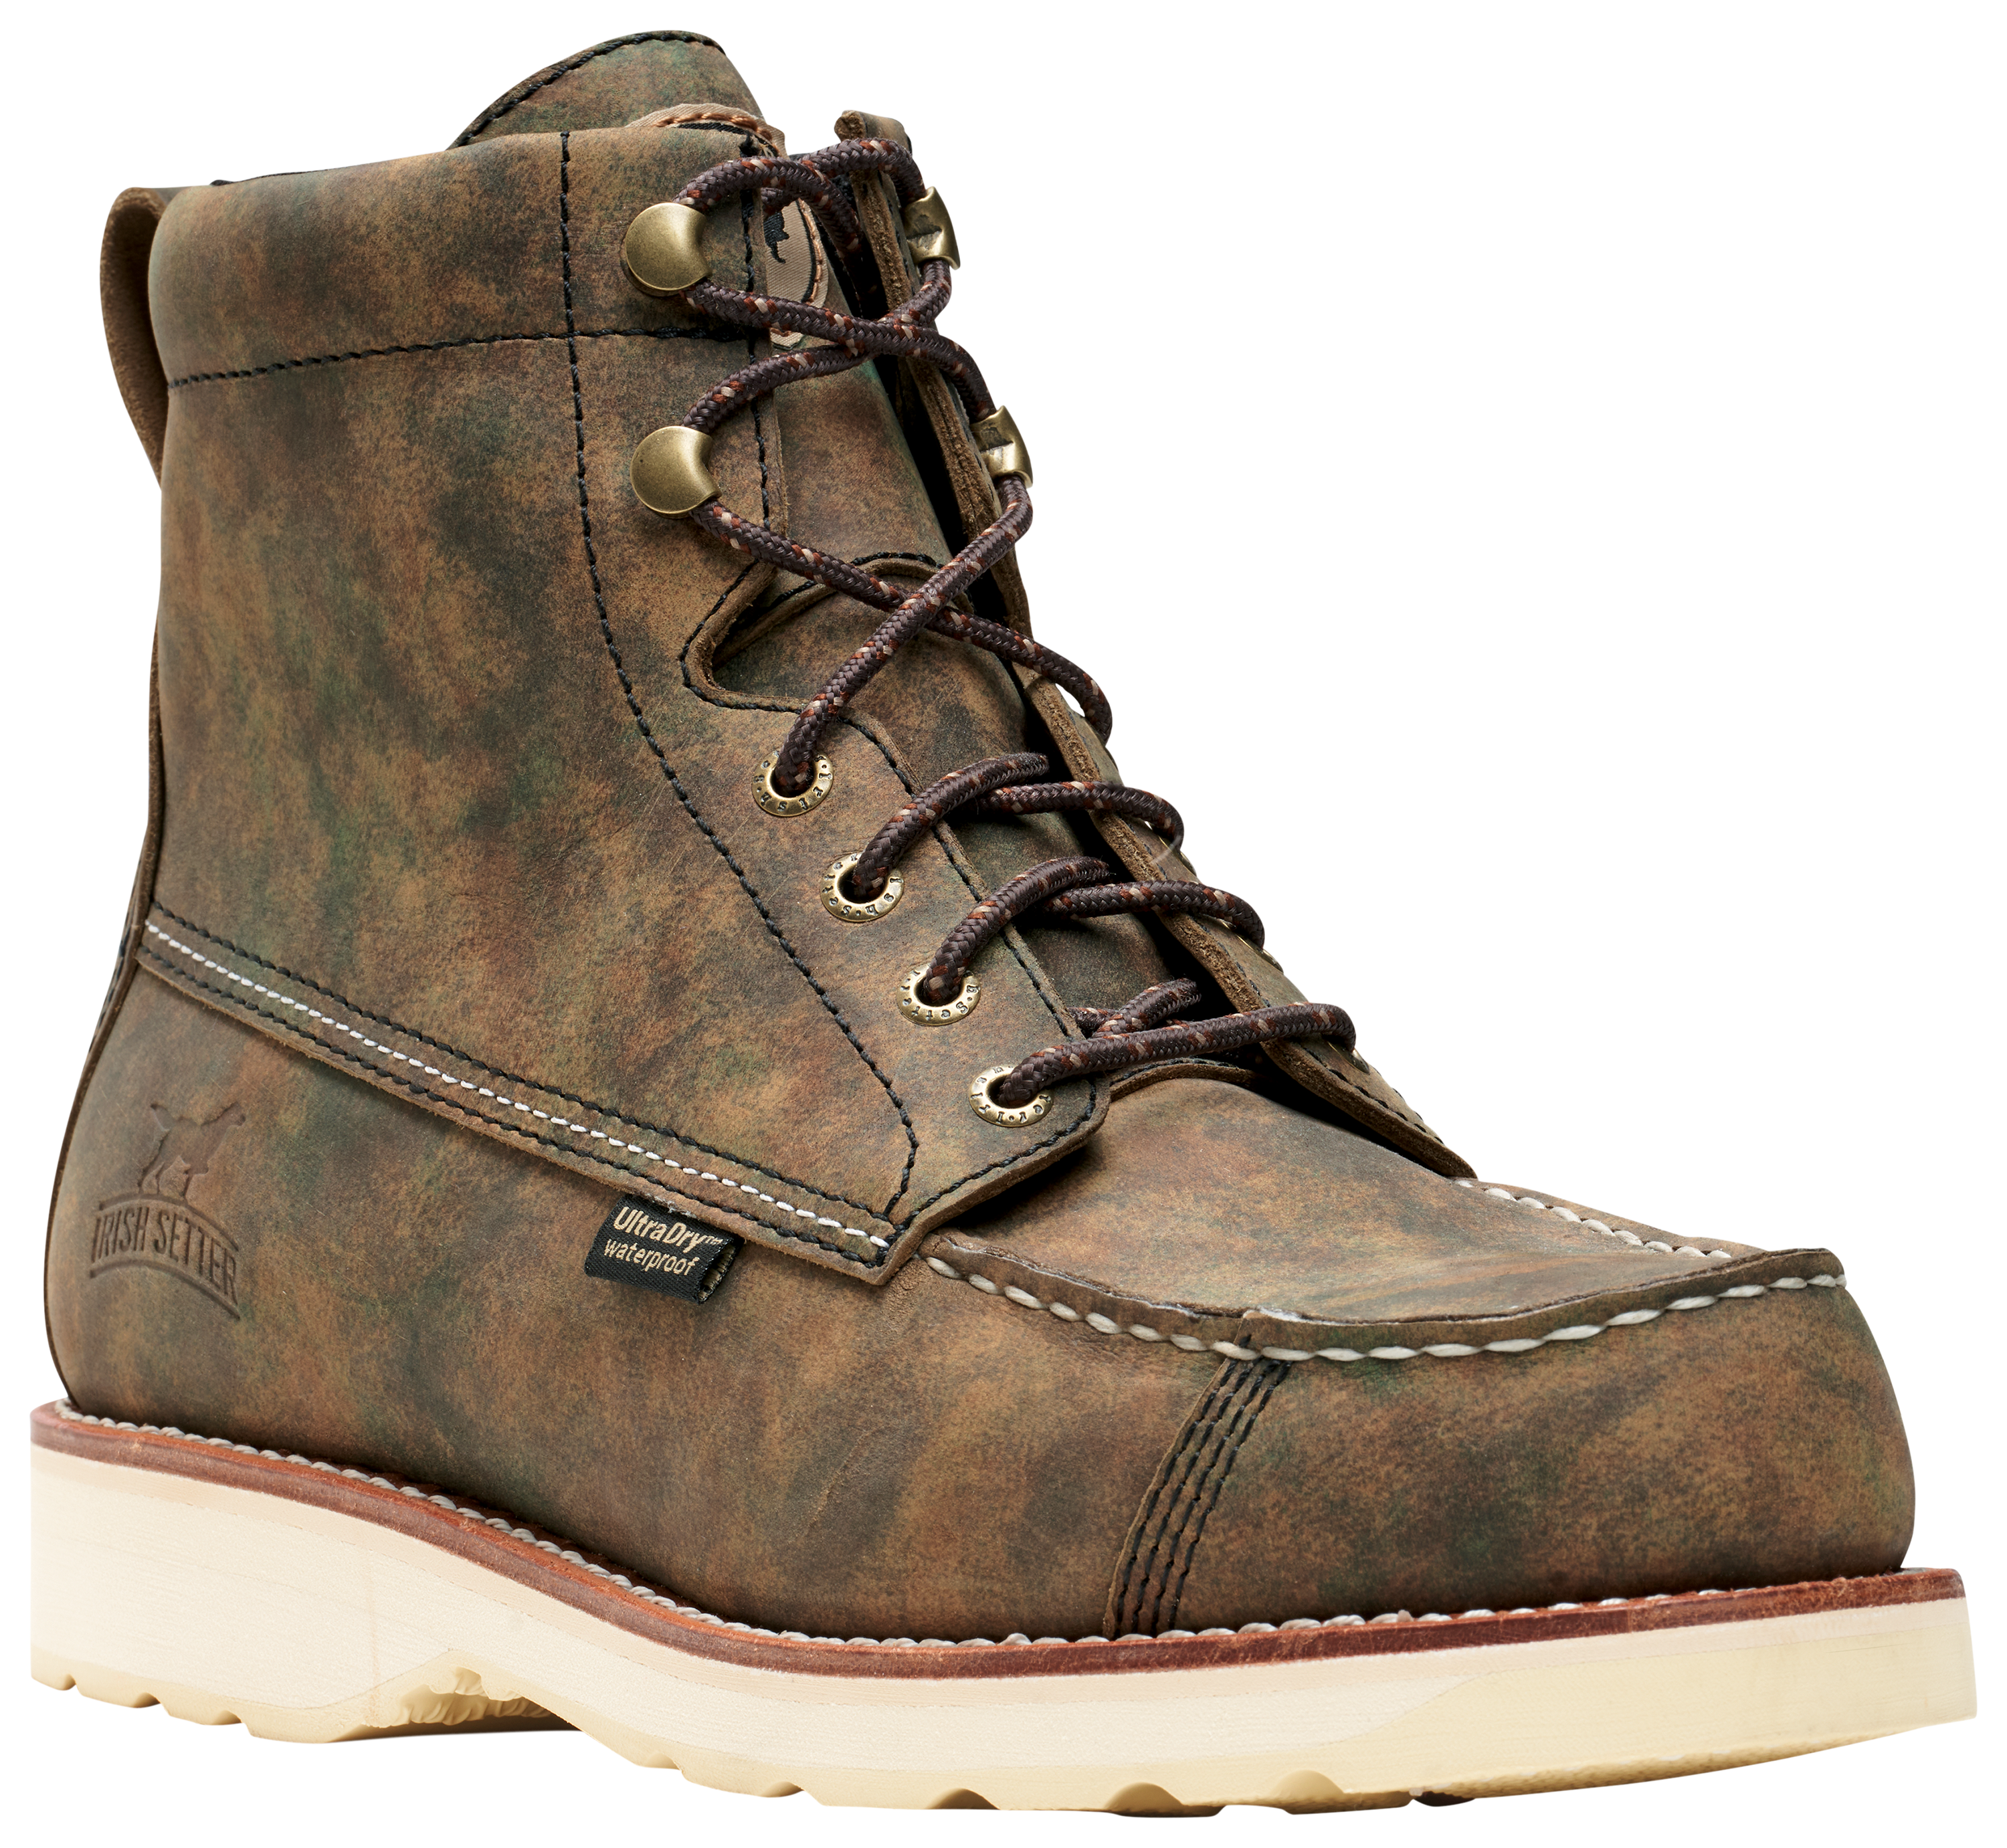 Irish Setter Wingshooter 7 Waterproof Hunting Boots for Men - Earth Camo - 8M